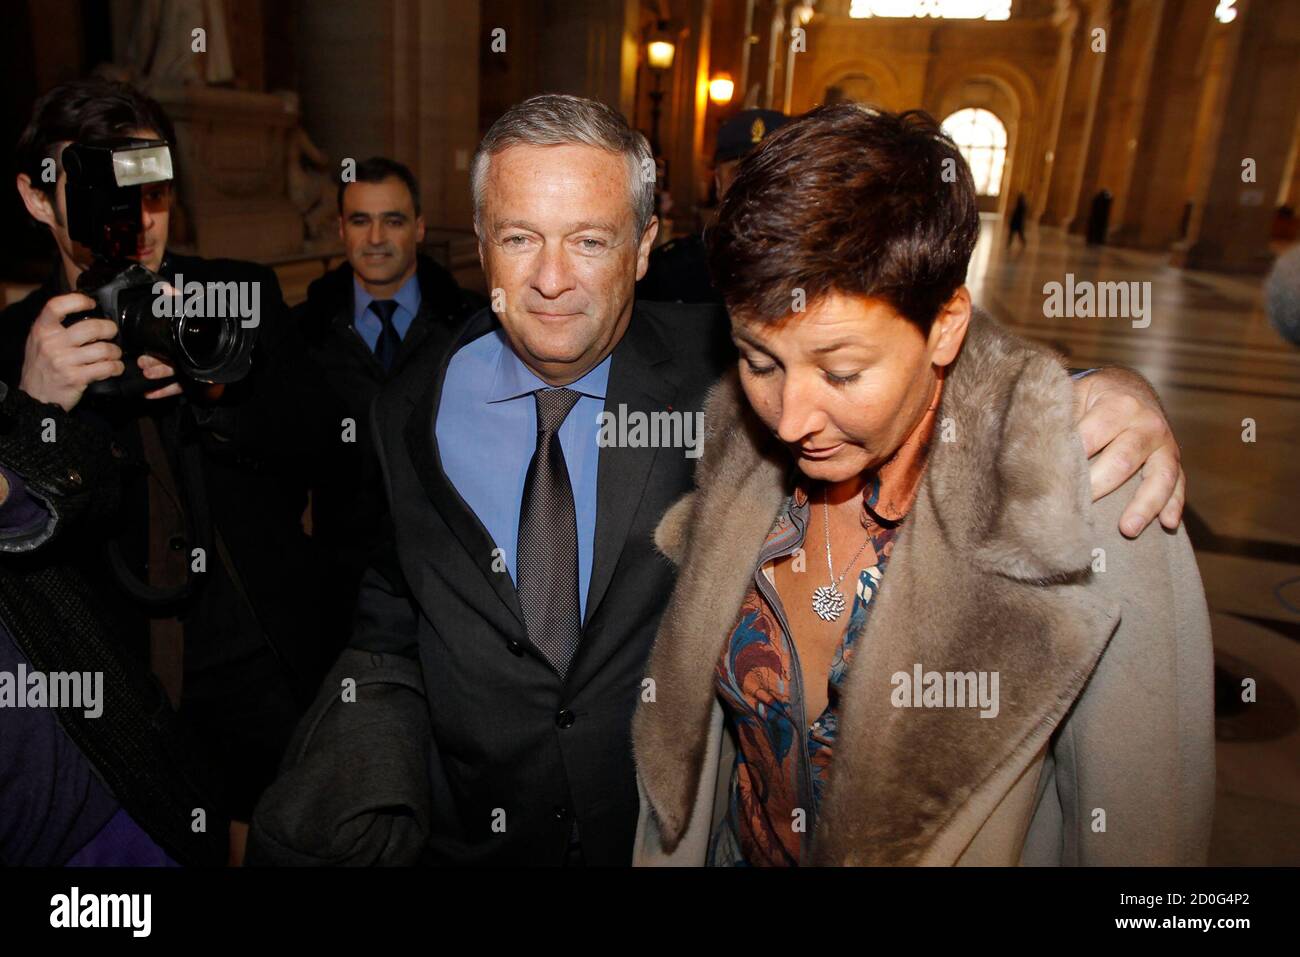 Former Vivendi head Jean-Marie Messier (L) and companion Christel Delaval  arrive at the Paris courts for the verdict in his trial January 21, 2011.  Messier, former CEO of media conglomerate Vivendi, is